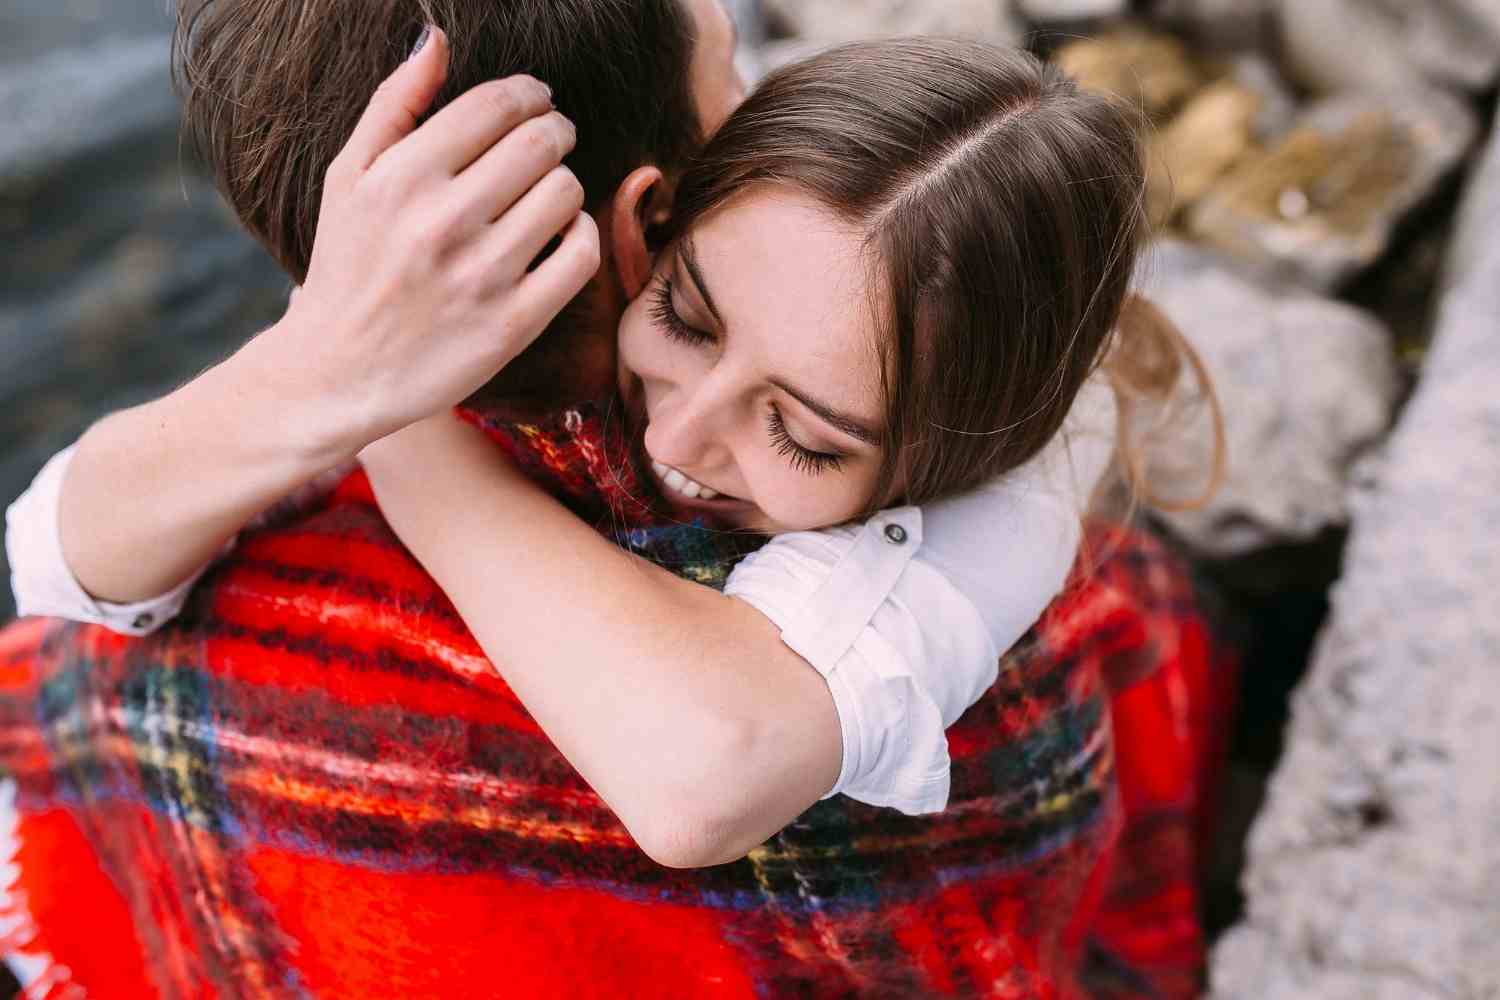 how to tell if a hug is romantic